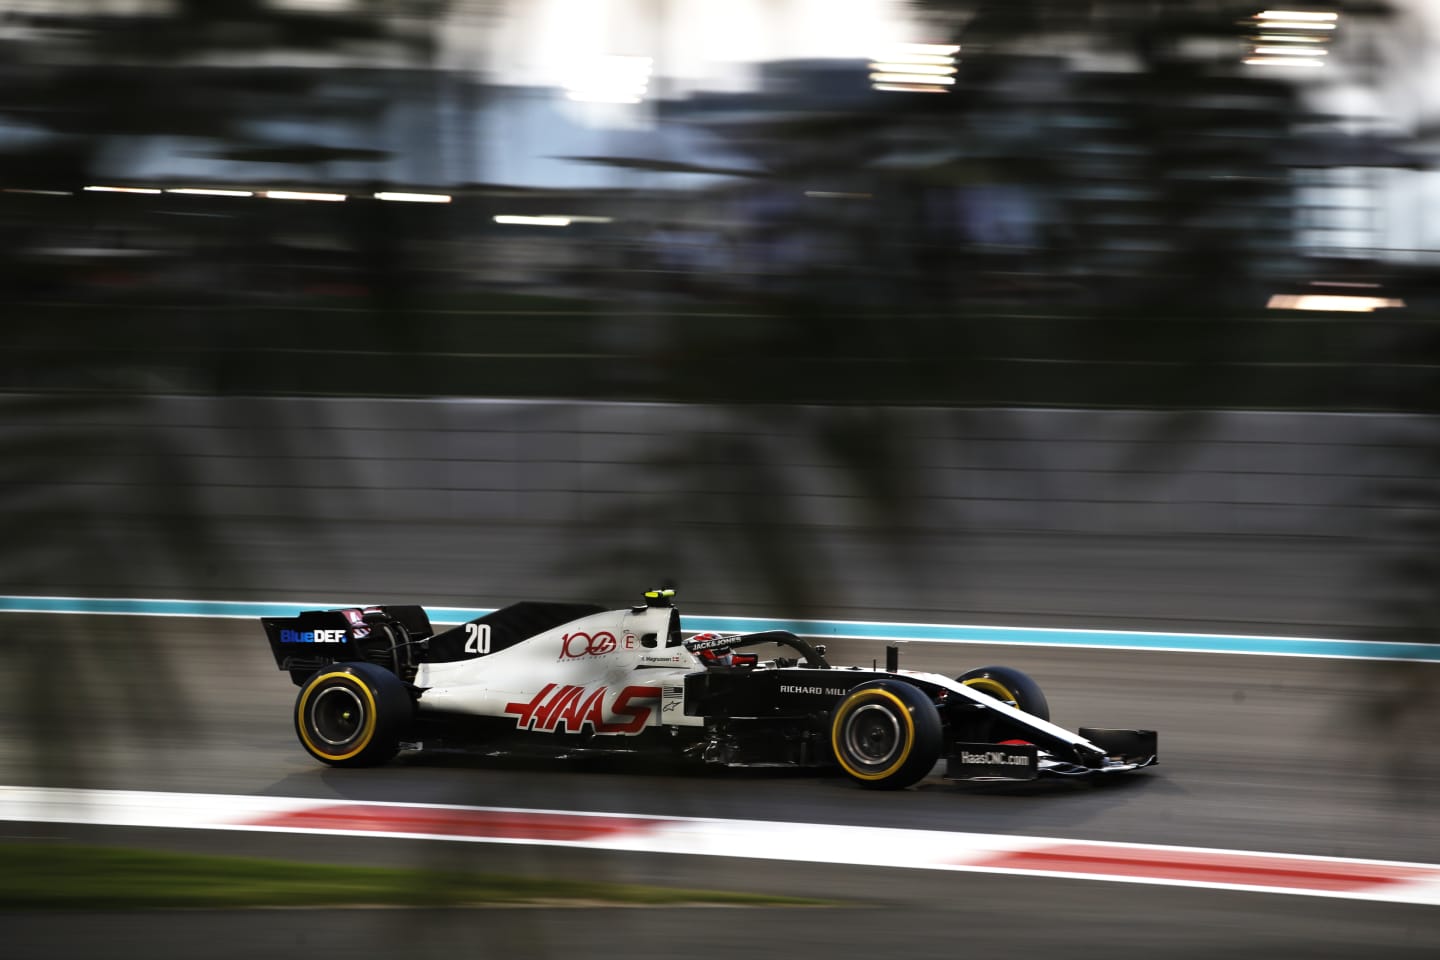 ABU DHABI, UNITED ARAB EMIRATES - DECEMBER 11: Kevin Magnussen of Denmark driving the (20) Haas F1 Team VF-20 Ferrari on track during practice ahead of the F1 Grand Prix of Abu Dhabi at Yas Marina Circuit on December 11, 2020 in Abu Dhabi, United Arab Emirates. (Photo by Hamad I Mohammed - Pool/Getty Images)